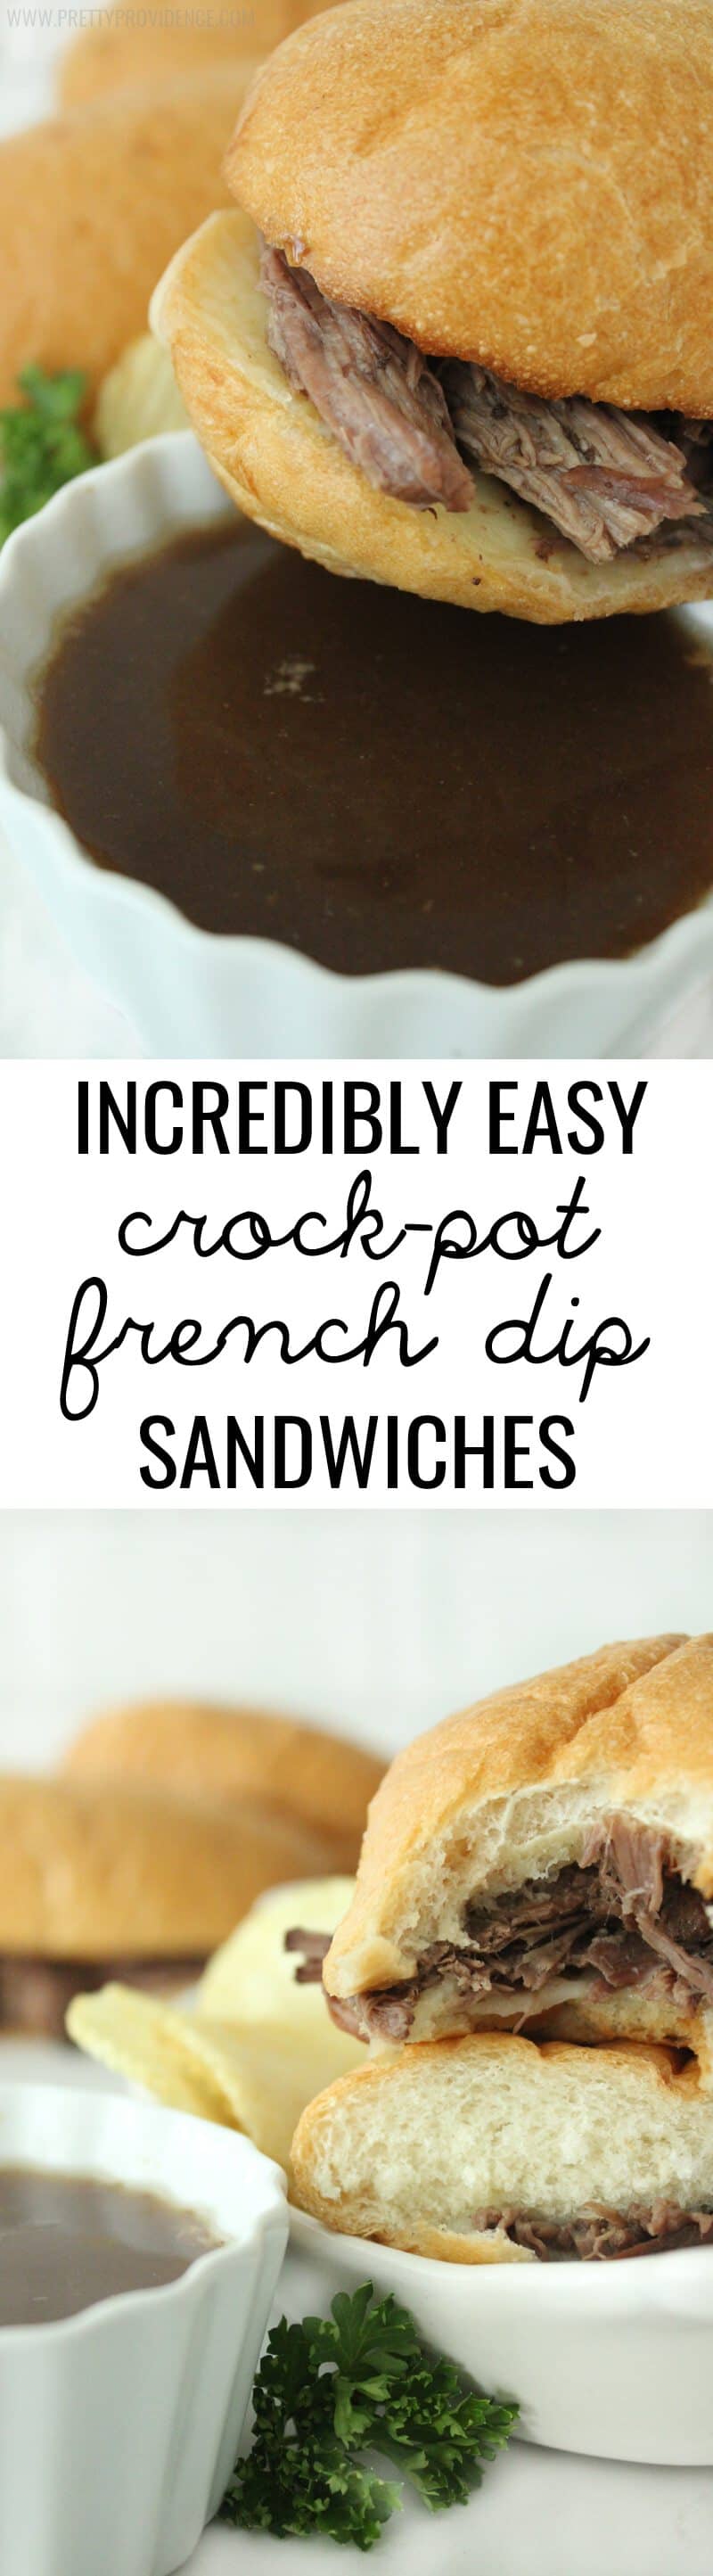 Okay these crock-pot french dip sandwiches are unbelievably good! Literally so easy and they taste amazing! They are my go-to when I'm having company, and everyone always raves about them. Five stars, for sure. 